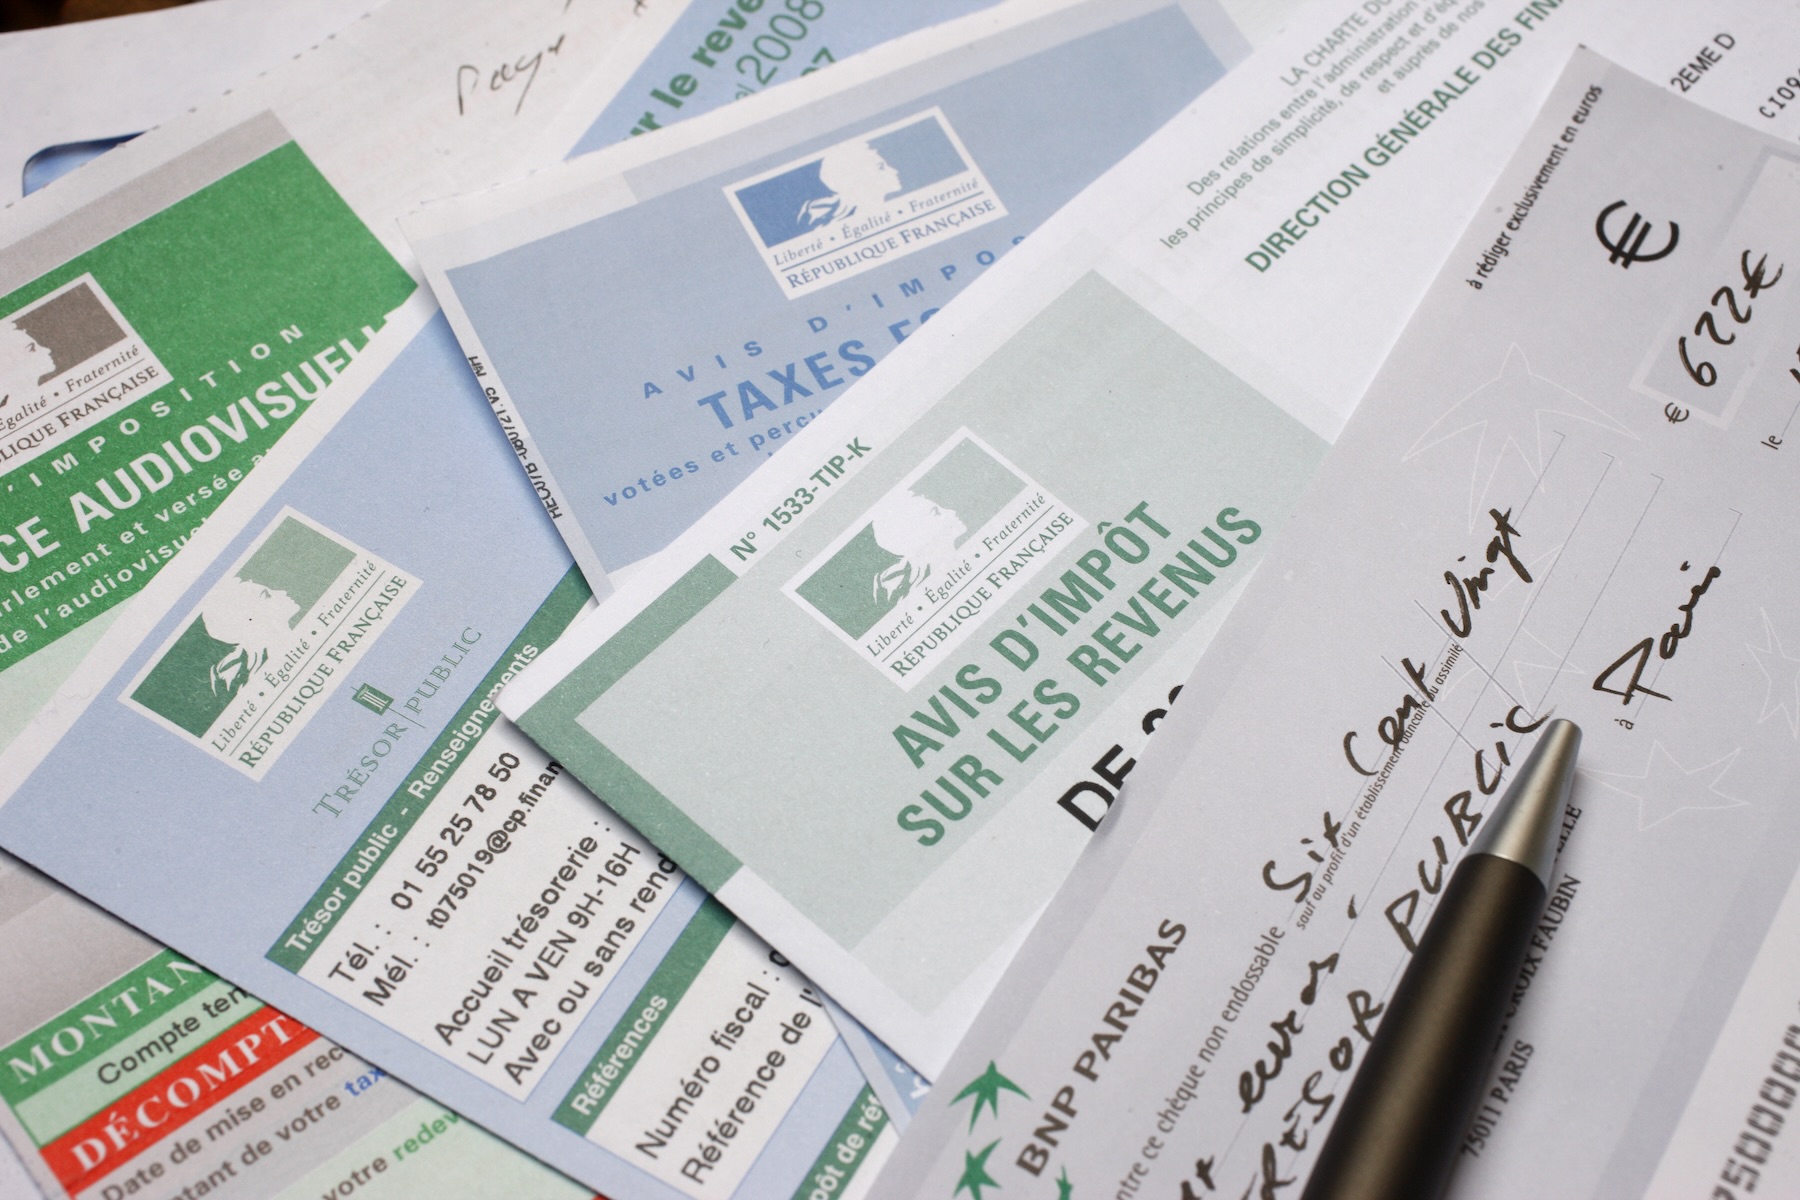 Several French income tax forms are stacked on top of each other, including a check